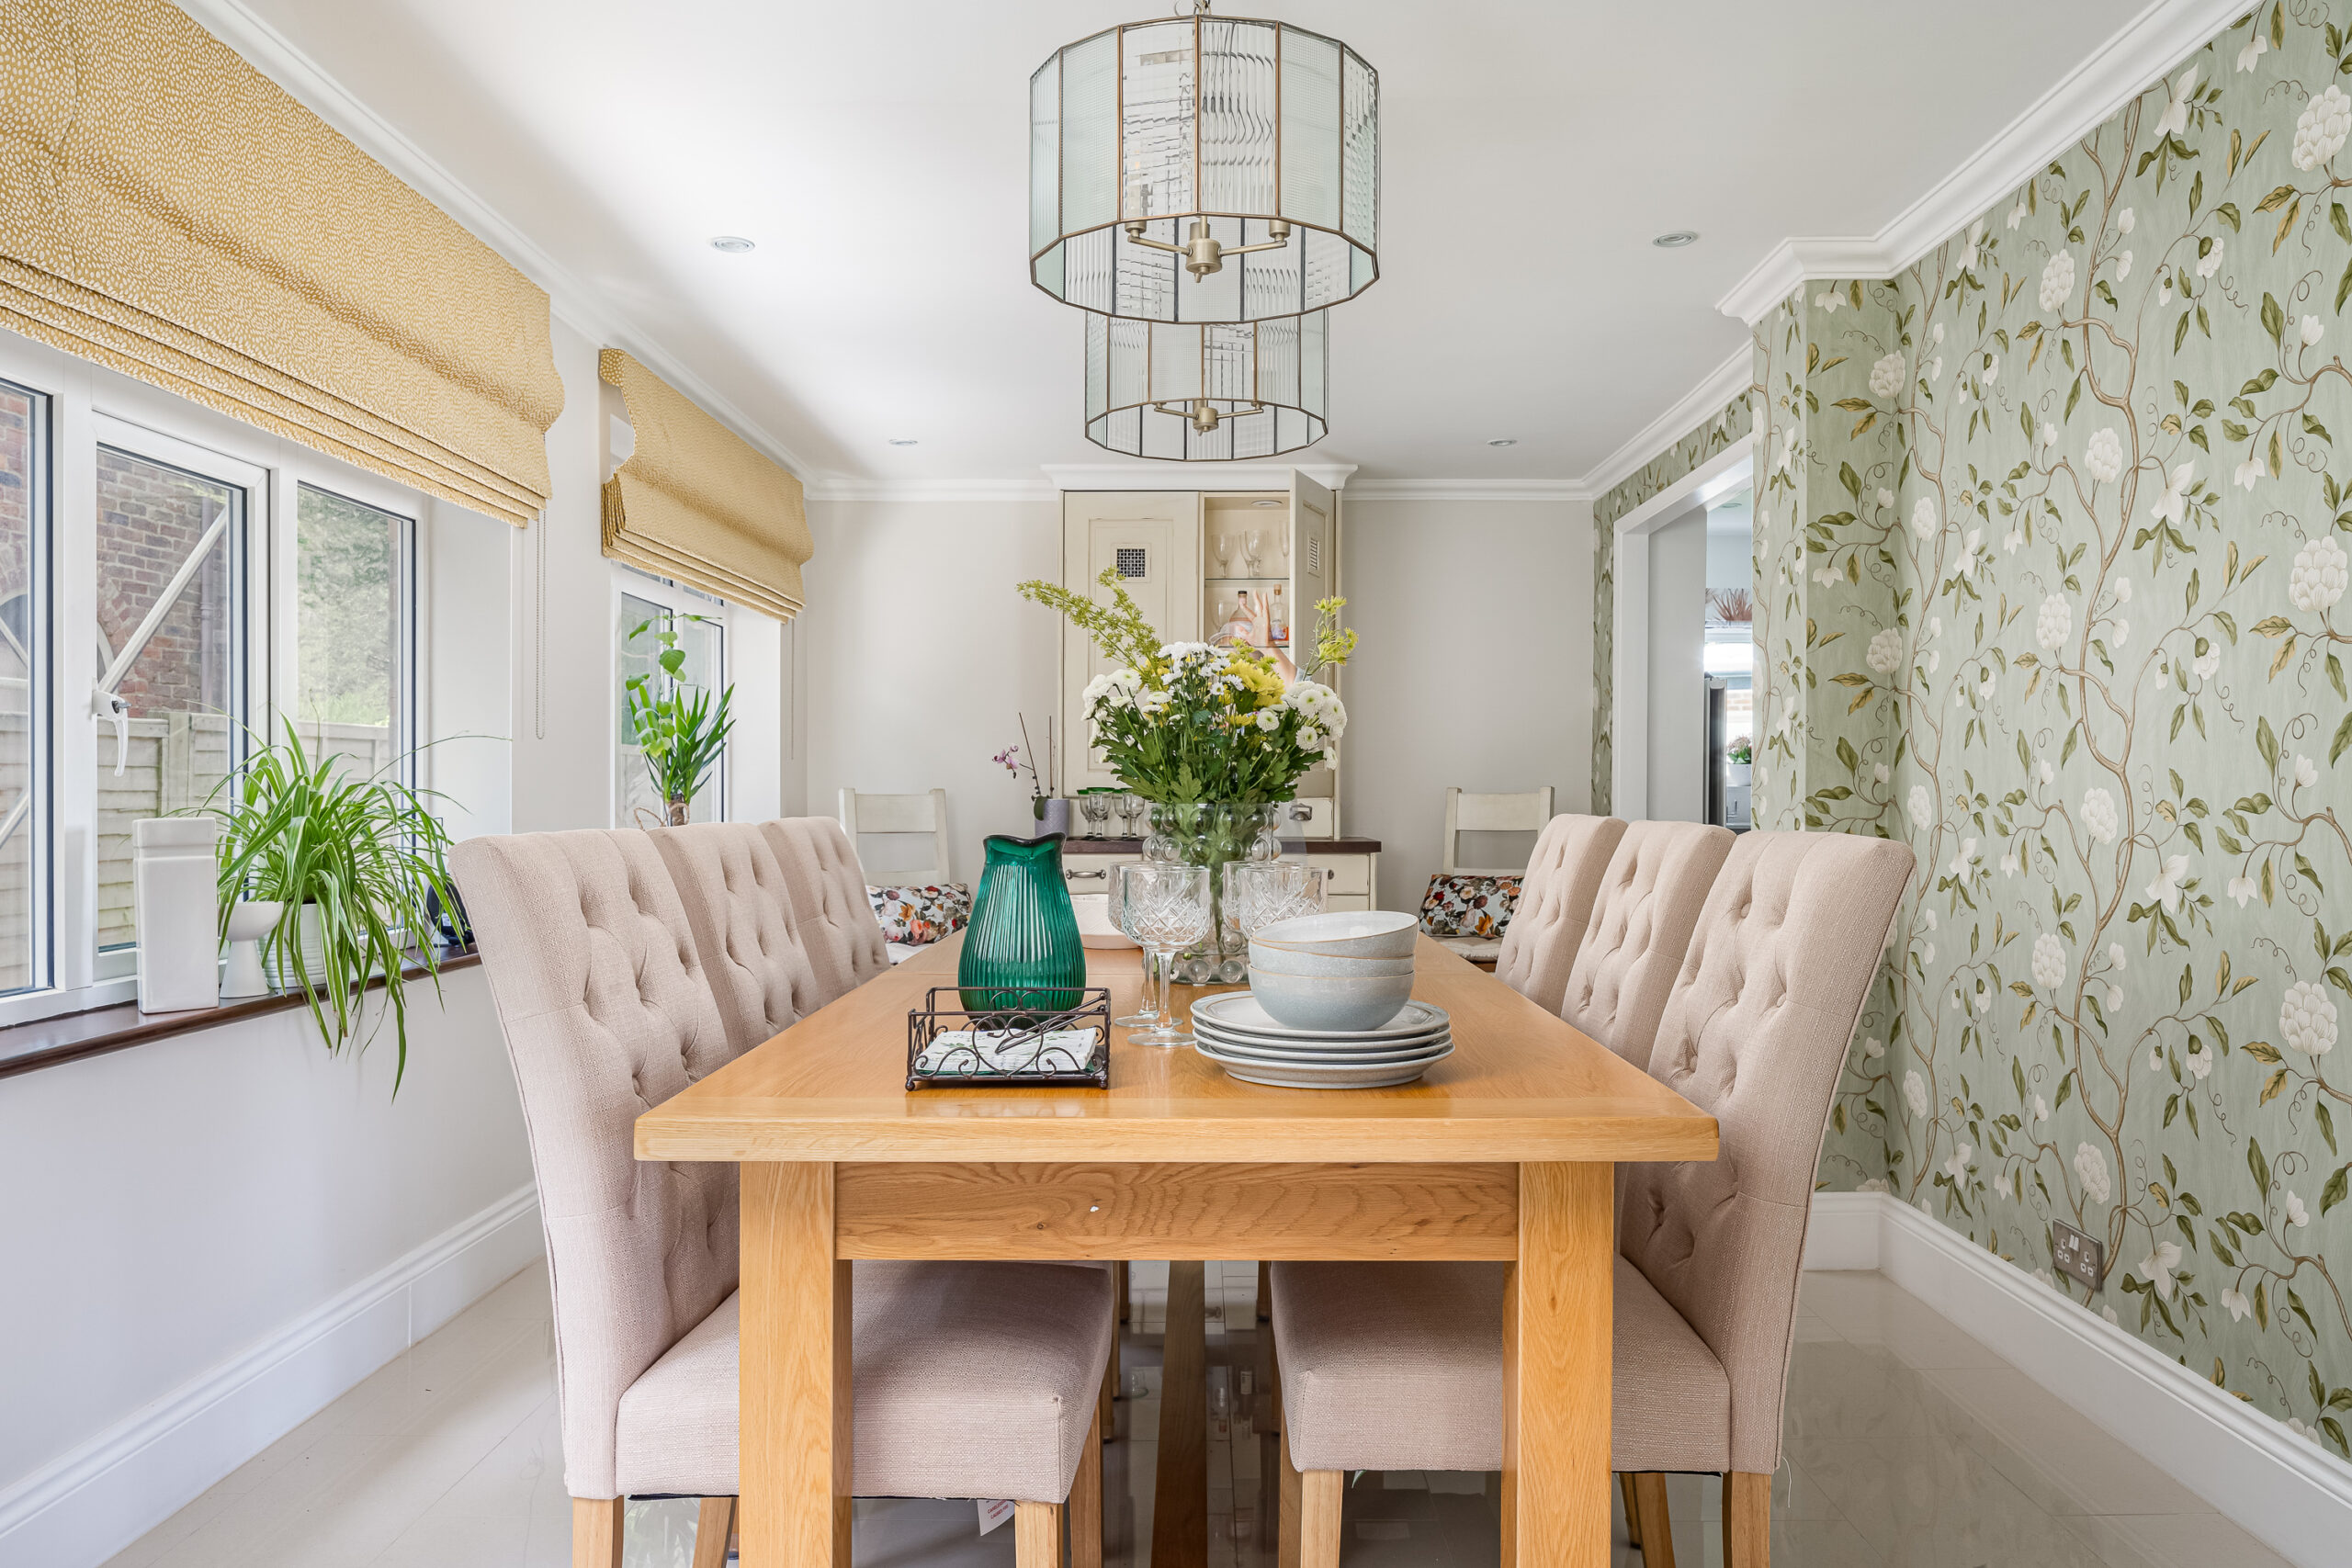 dining room scheme, natural light, country style home, natural materials, lighting, styling, home staging, feature wallpaper, colourful interiors, fresh home makeover